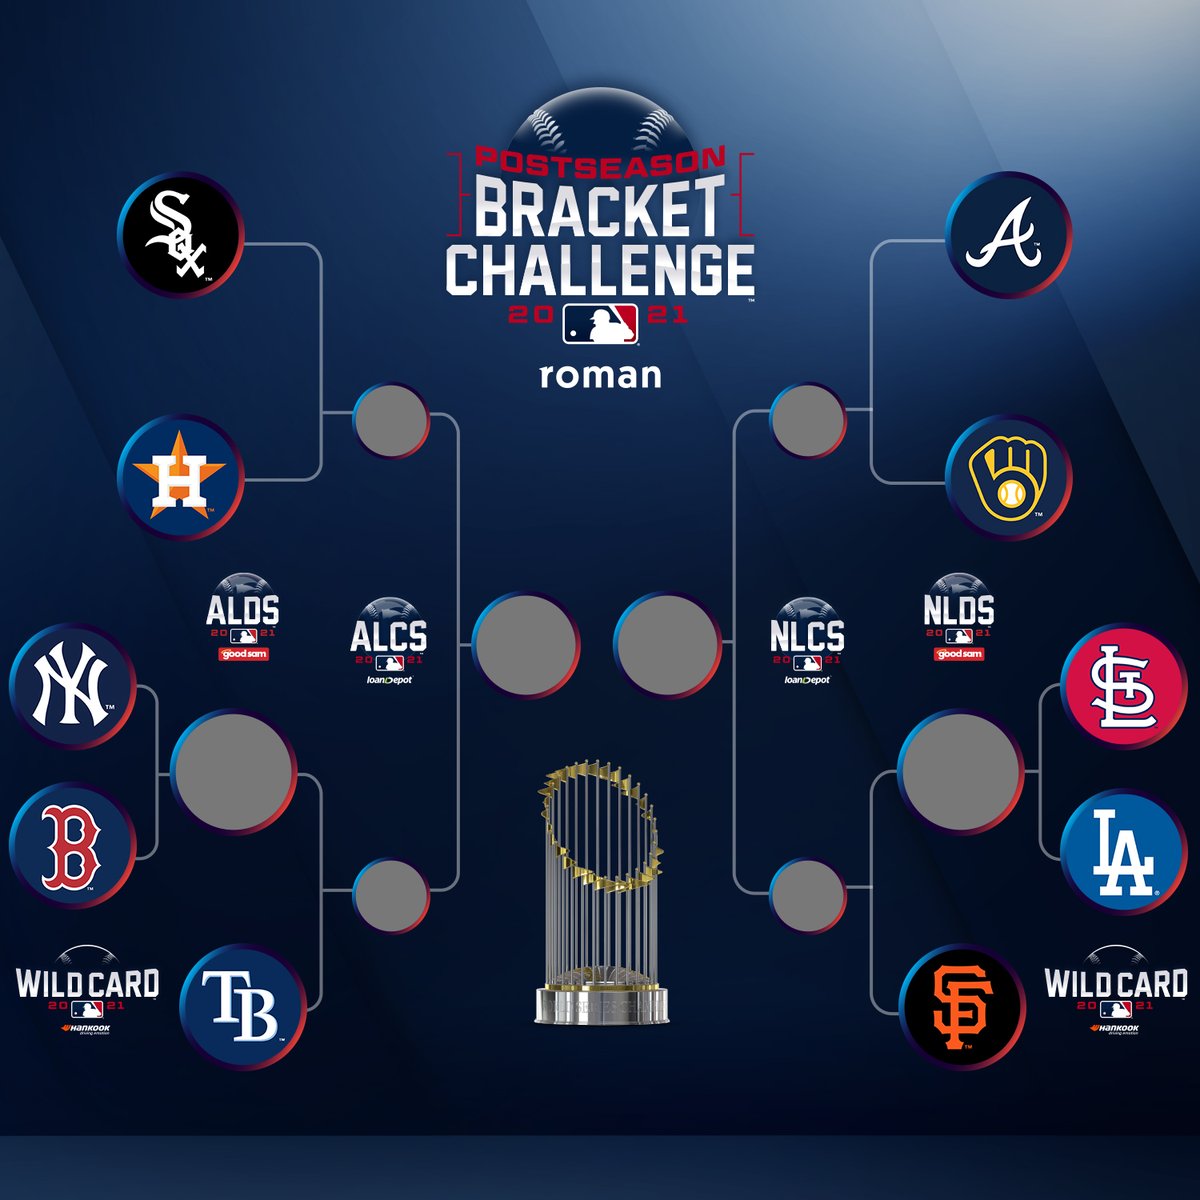 MLB on X: Who's moving on? Fill out your #postseason bracket for